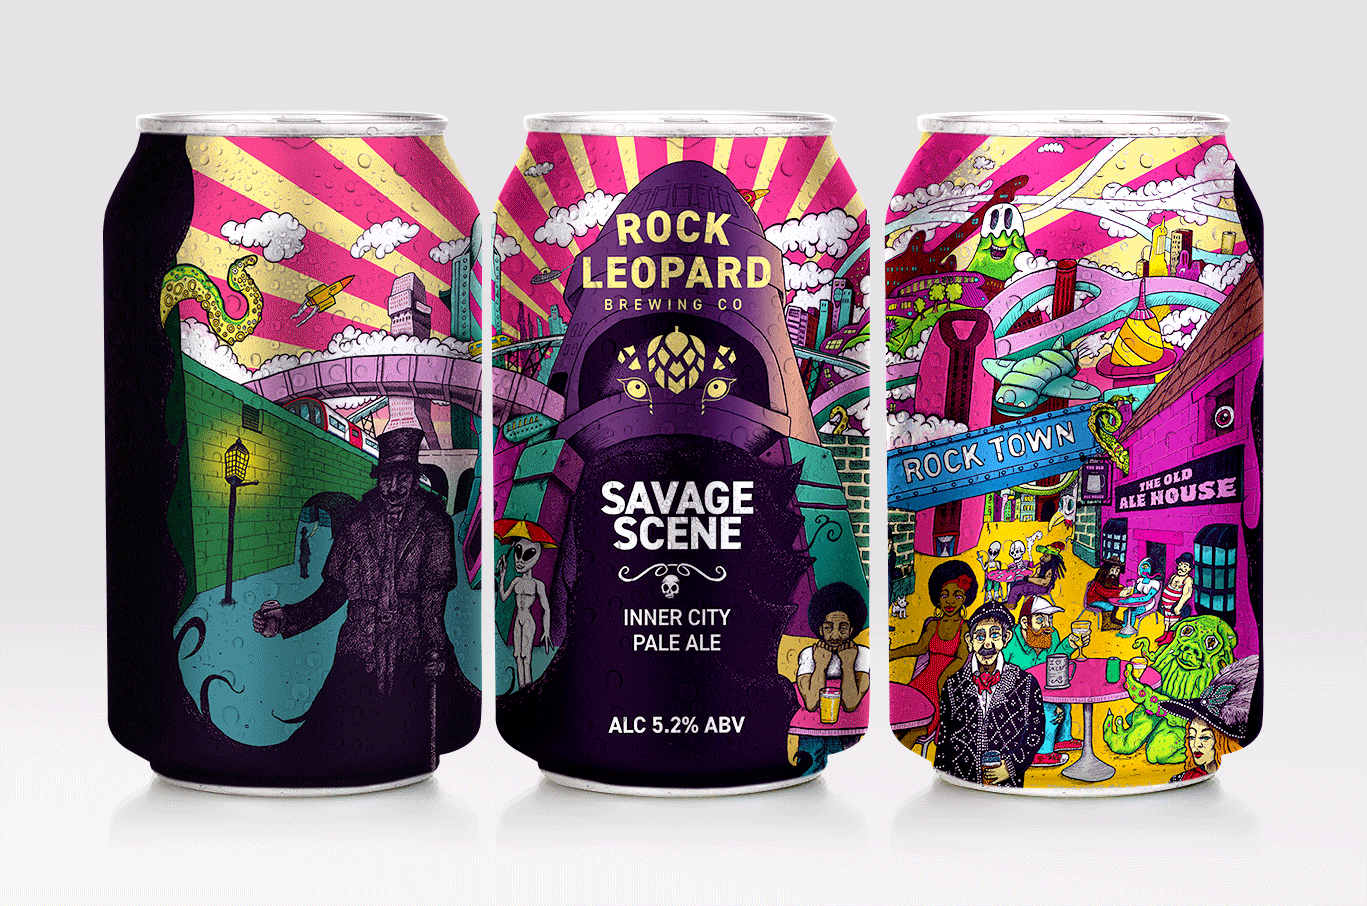 Savage Scene Inner City Pale Ale - Rock Leopard Brewing Co. Craft Beer Can Illustration